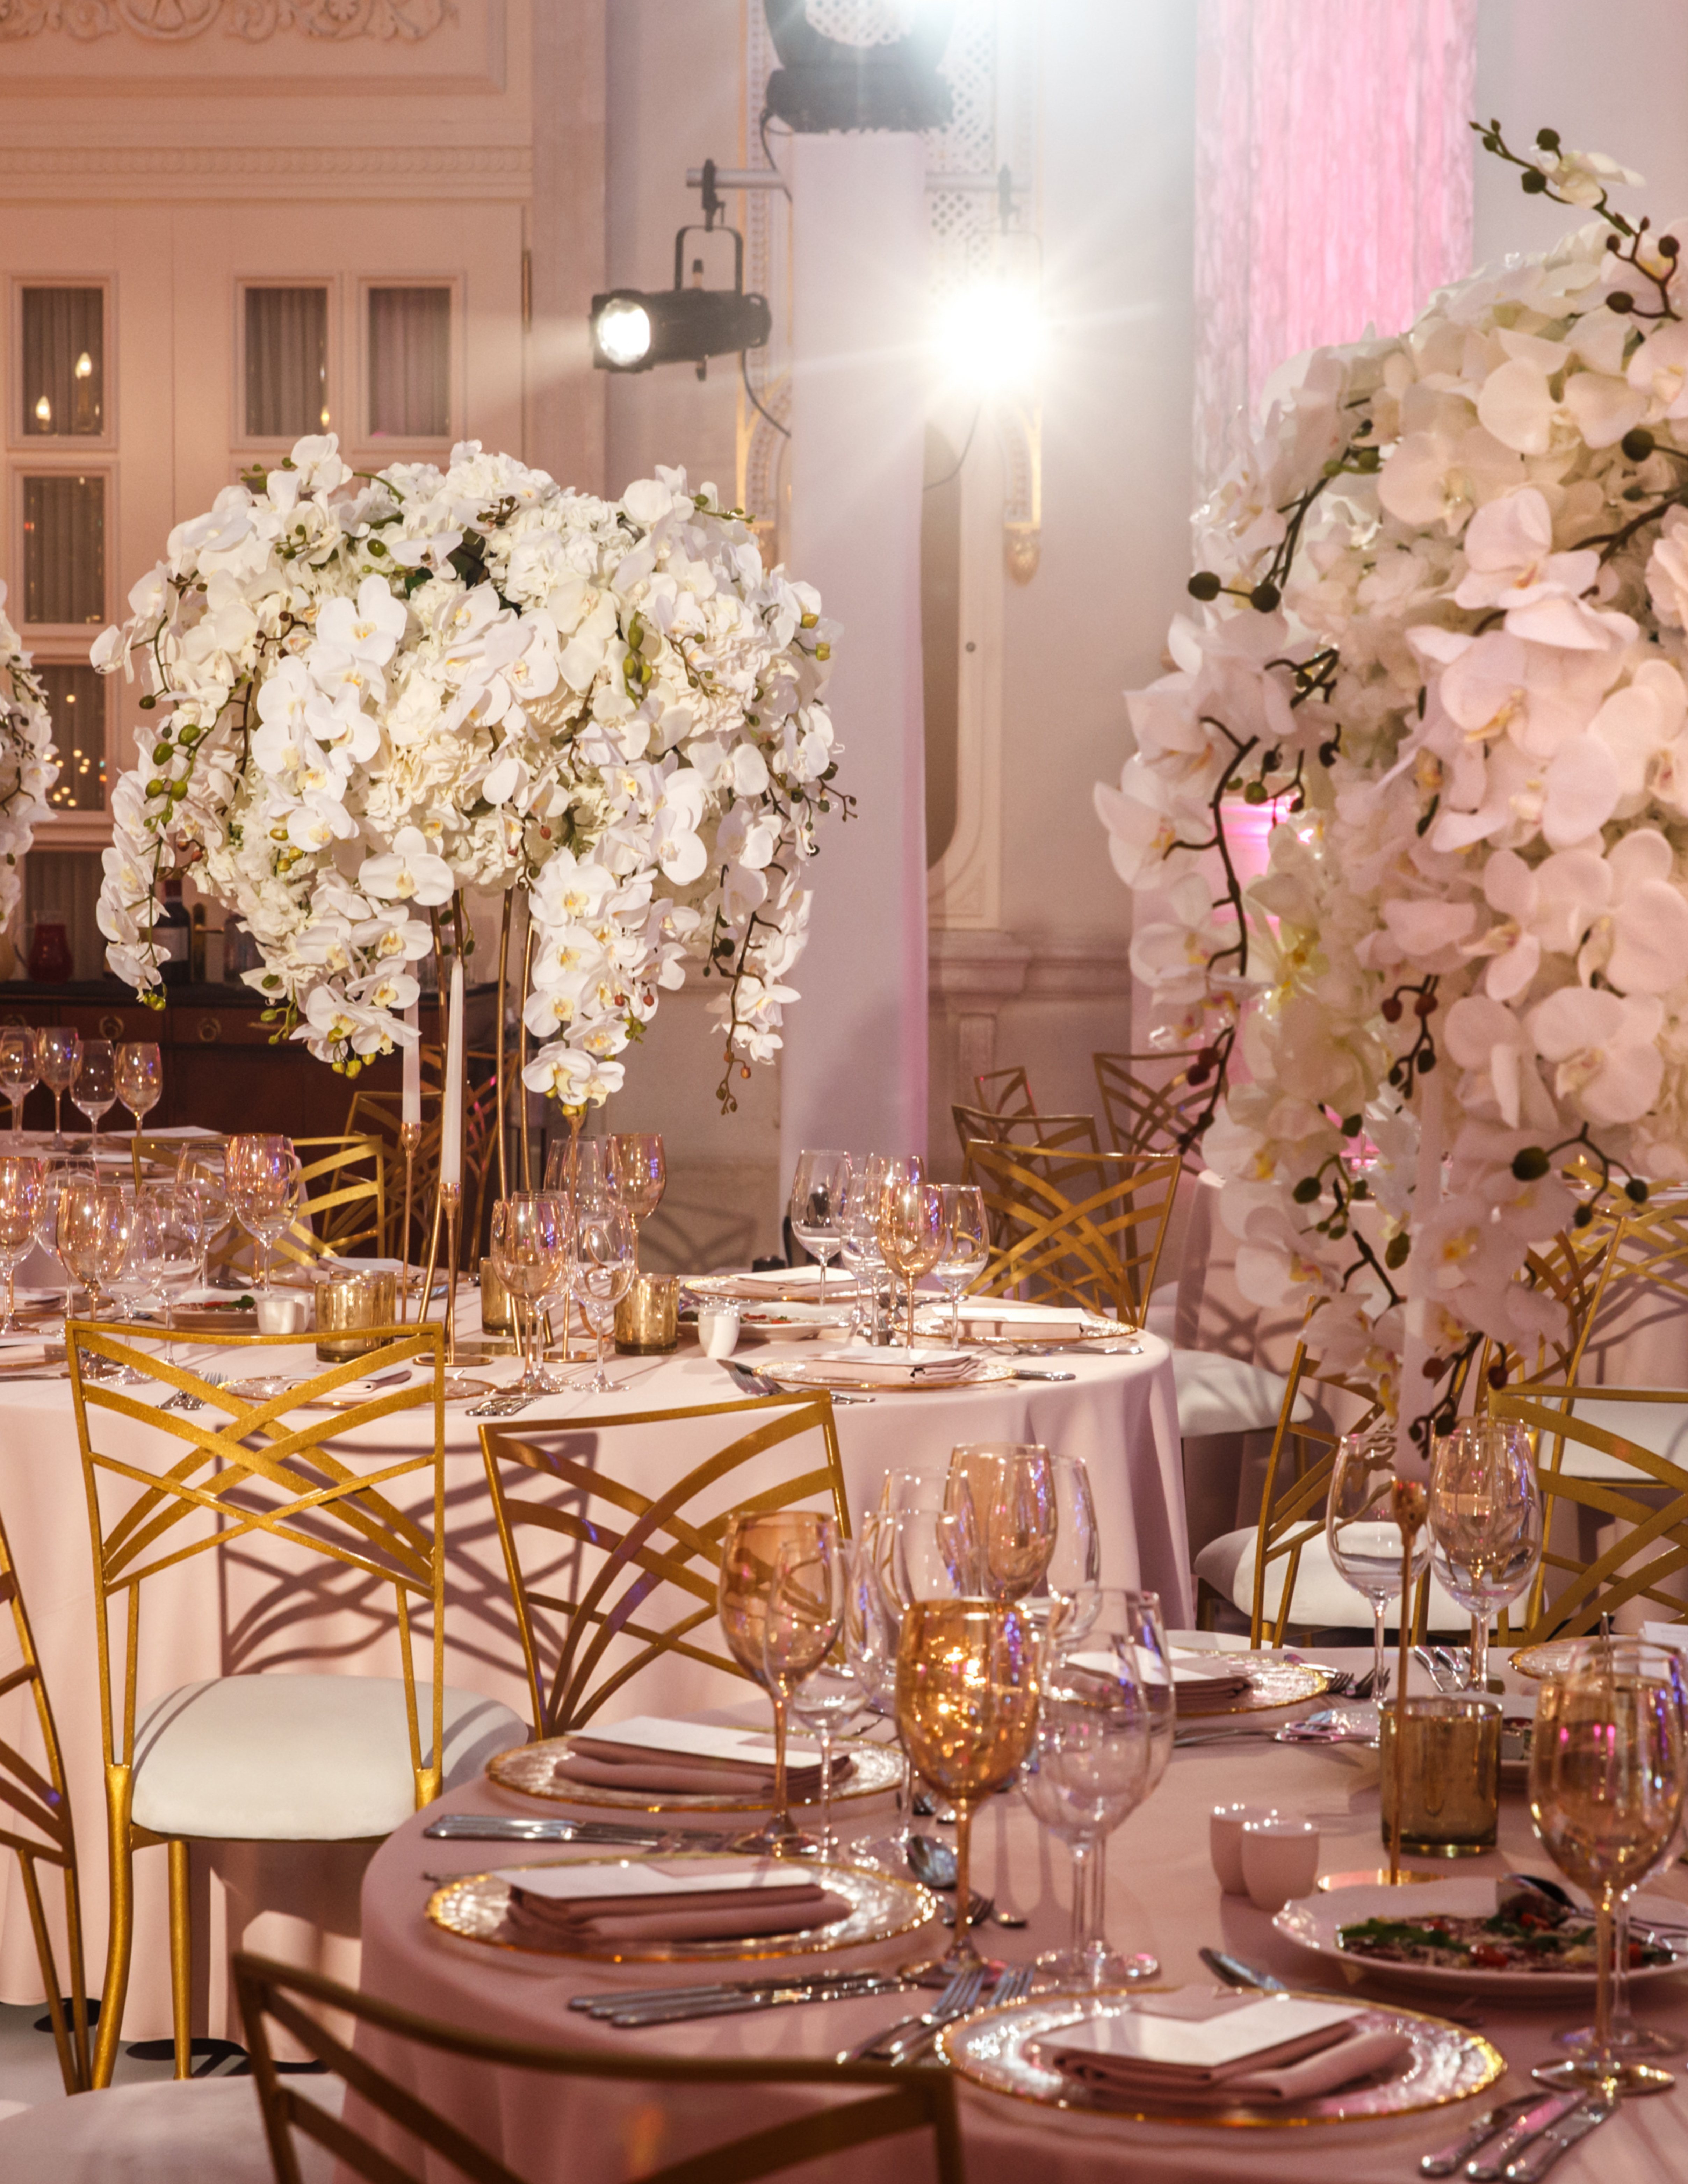 Stunning and Elegant Event Center With Catering Business